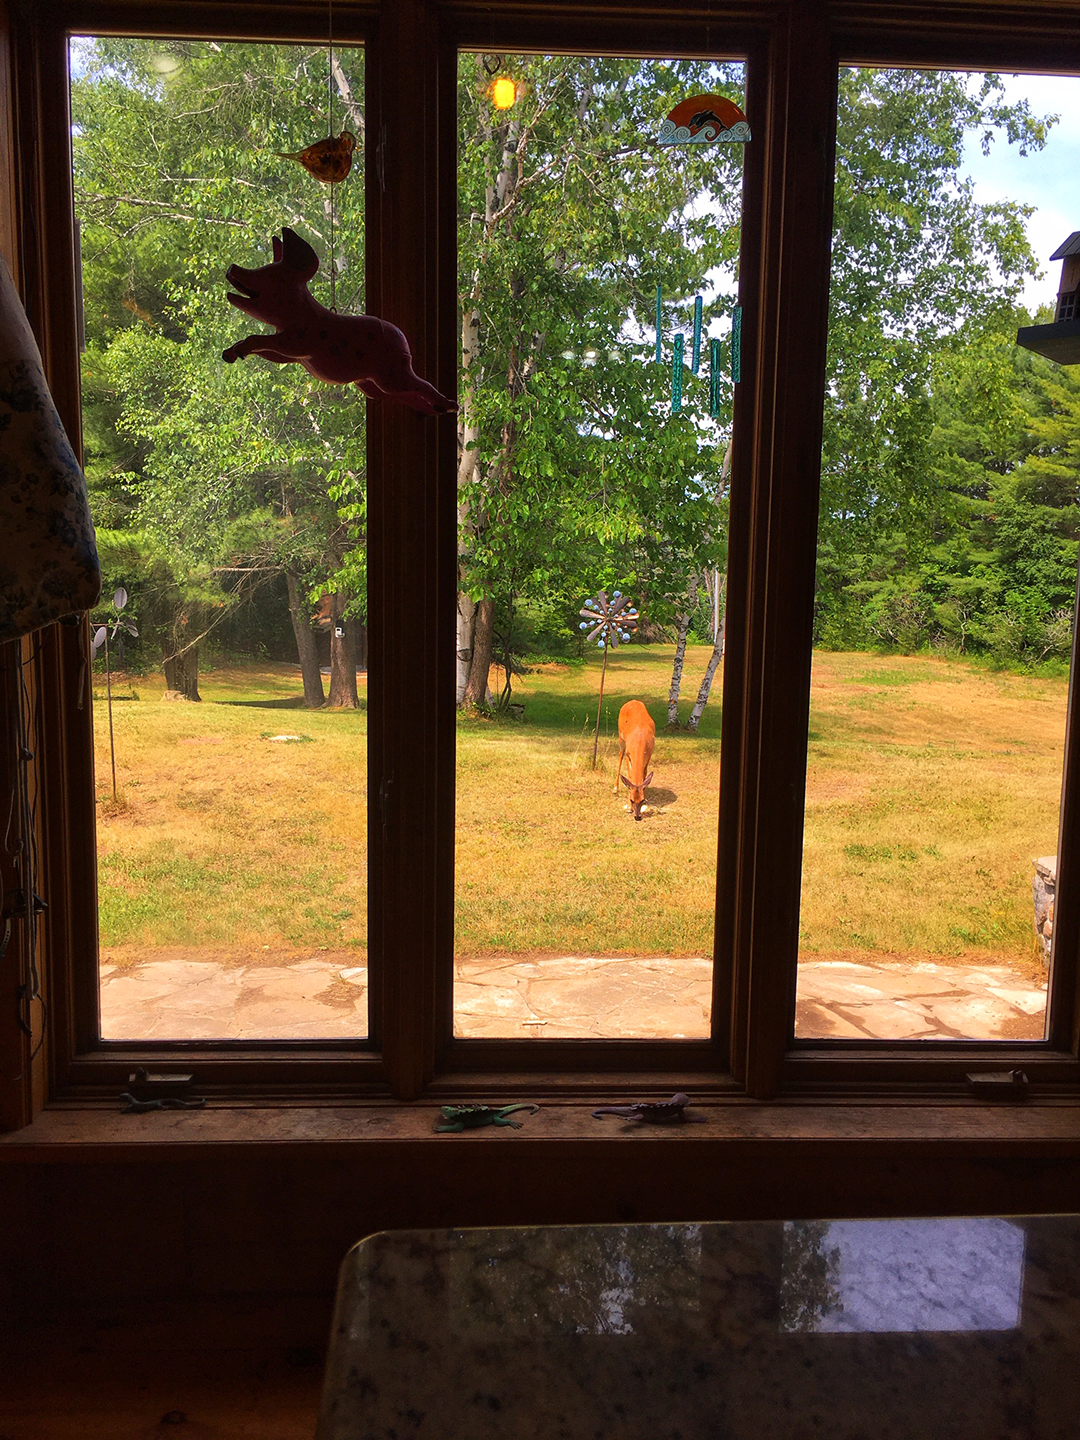 Frequent Bambi Visitors - Kitchen Window View